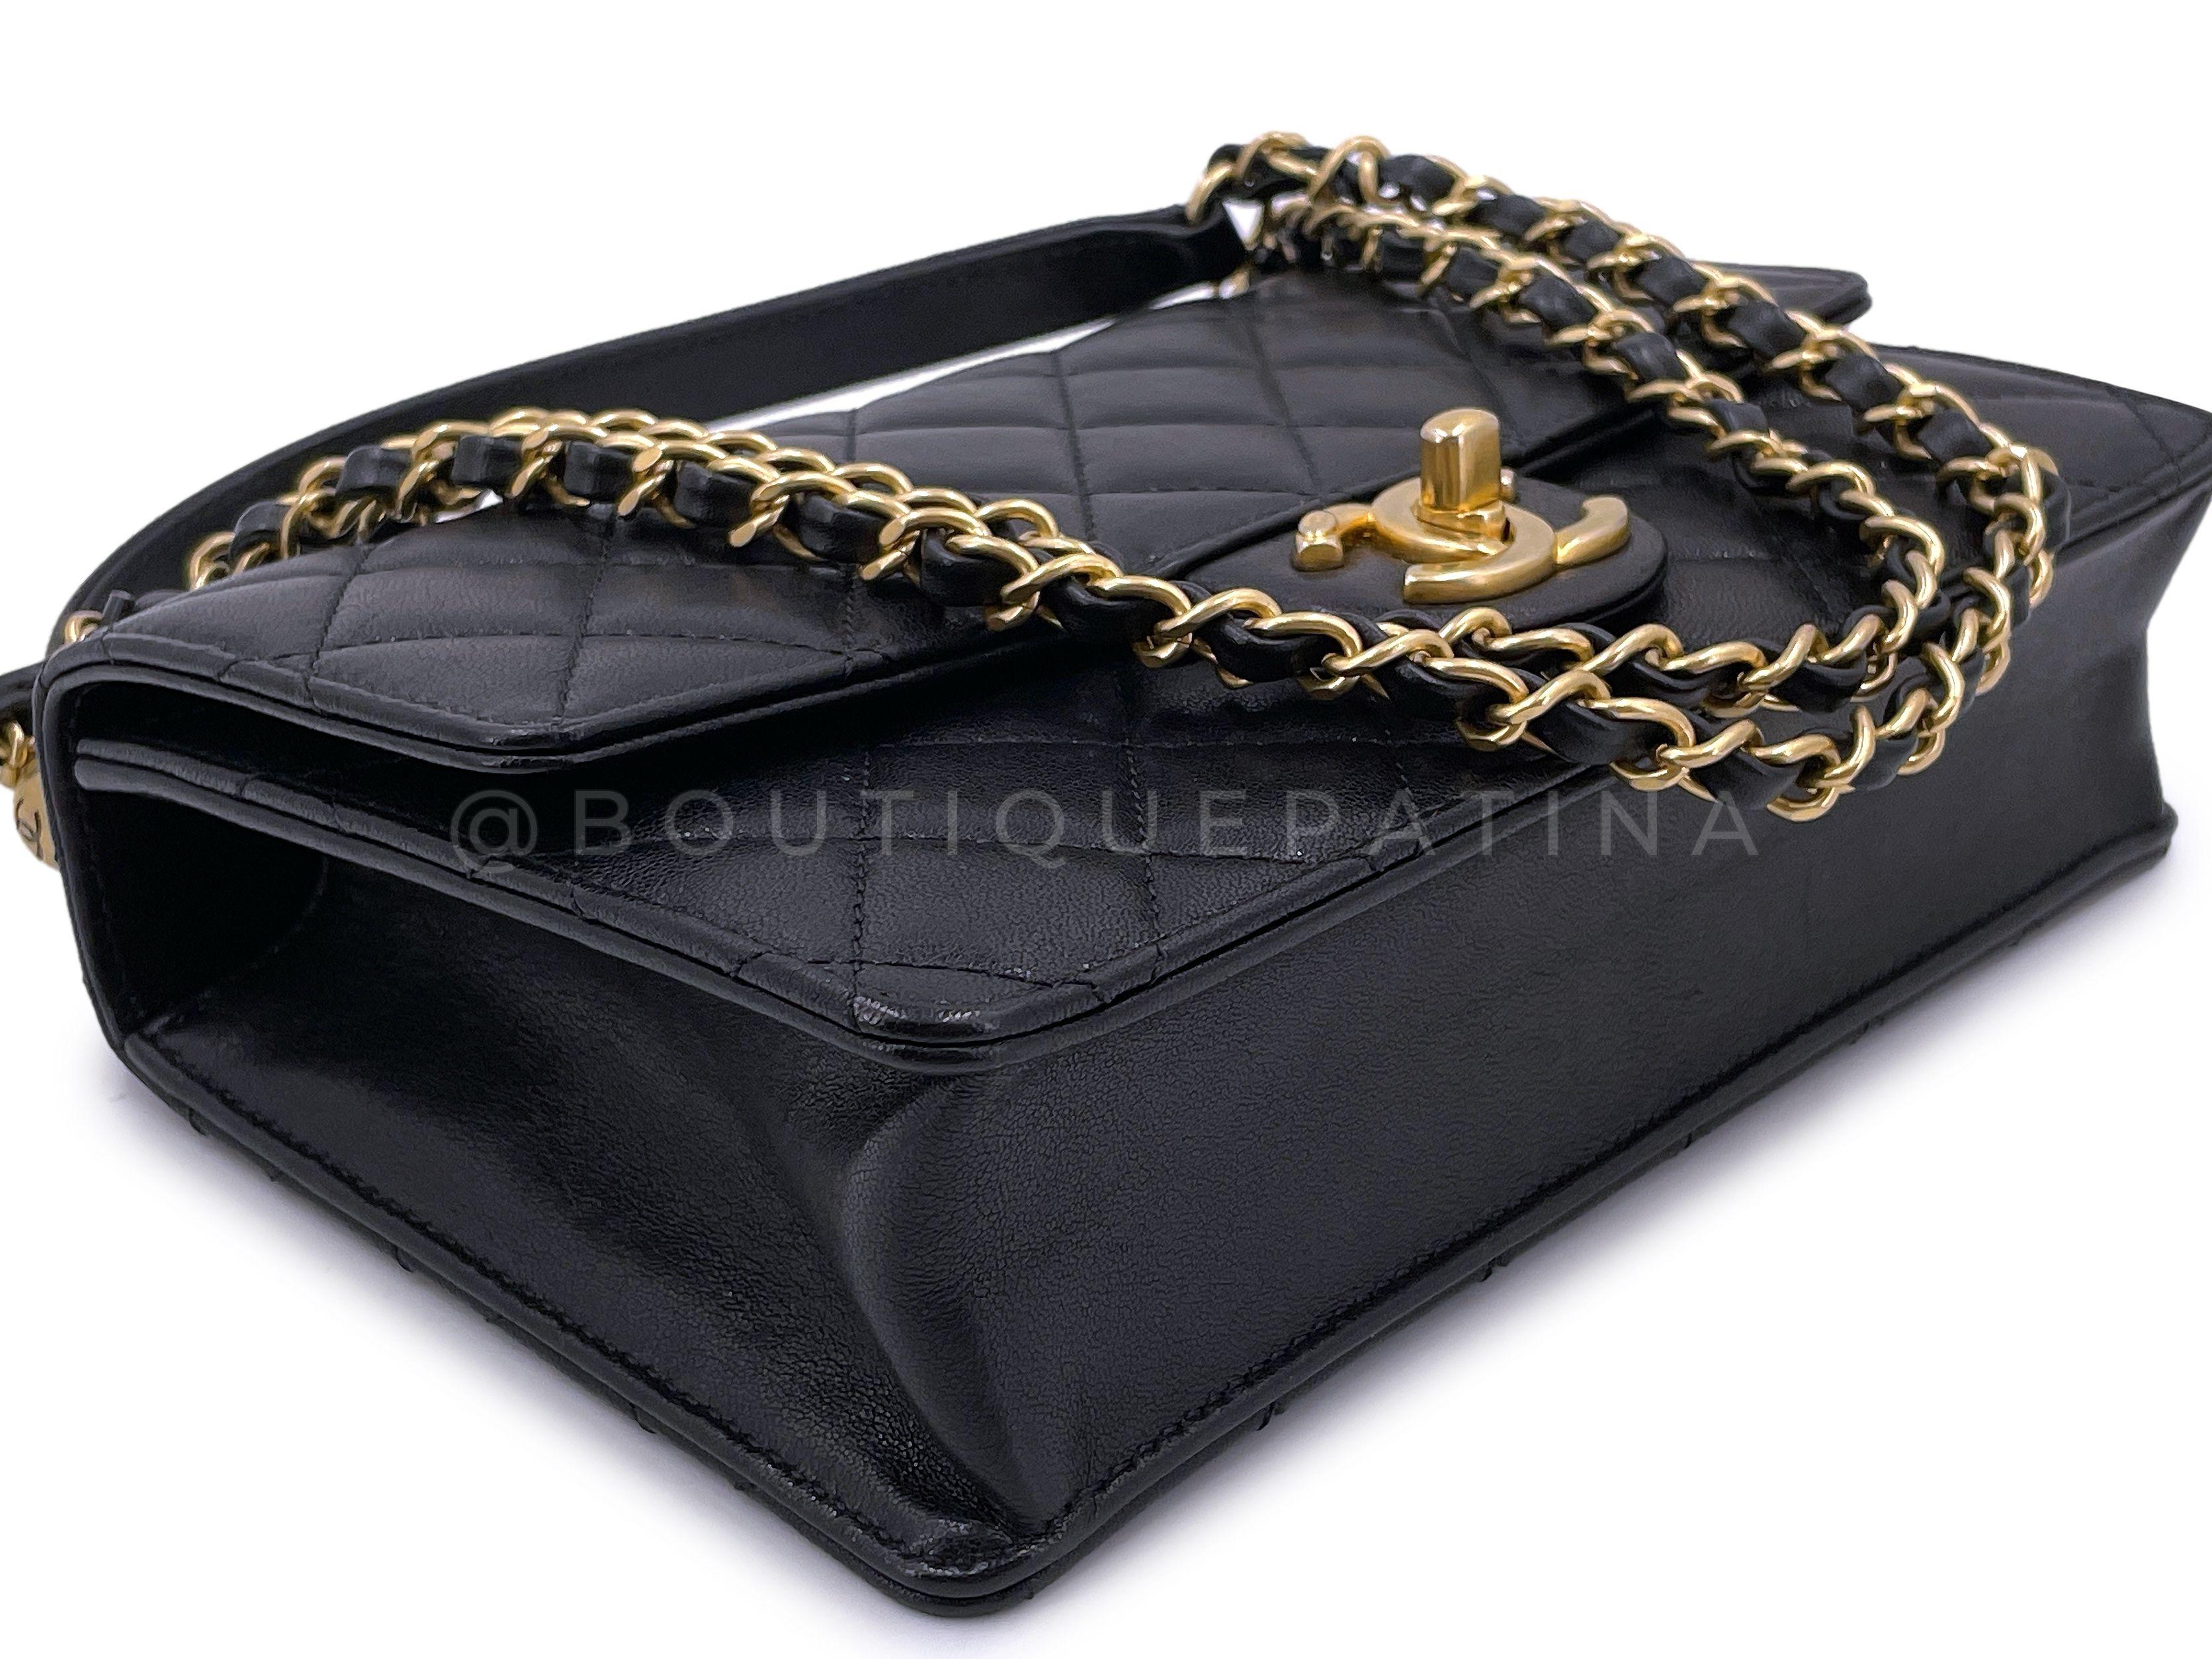 Pristine 19S Chanel Chic Pearls Quilted Flap Bag Black GHW 66675 For Sale 2